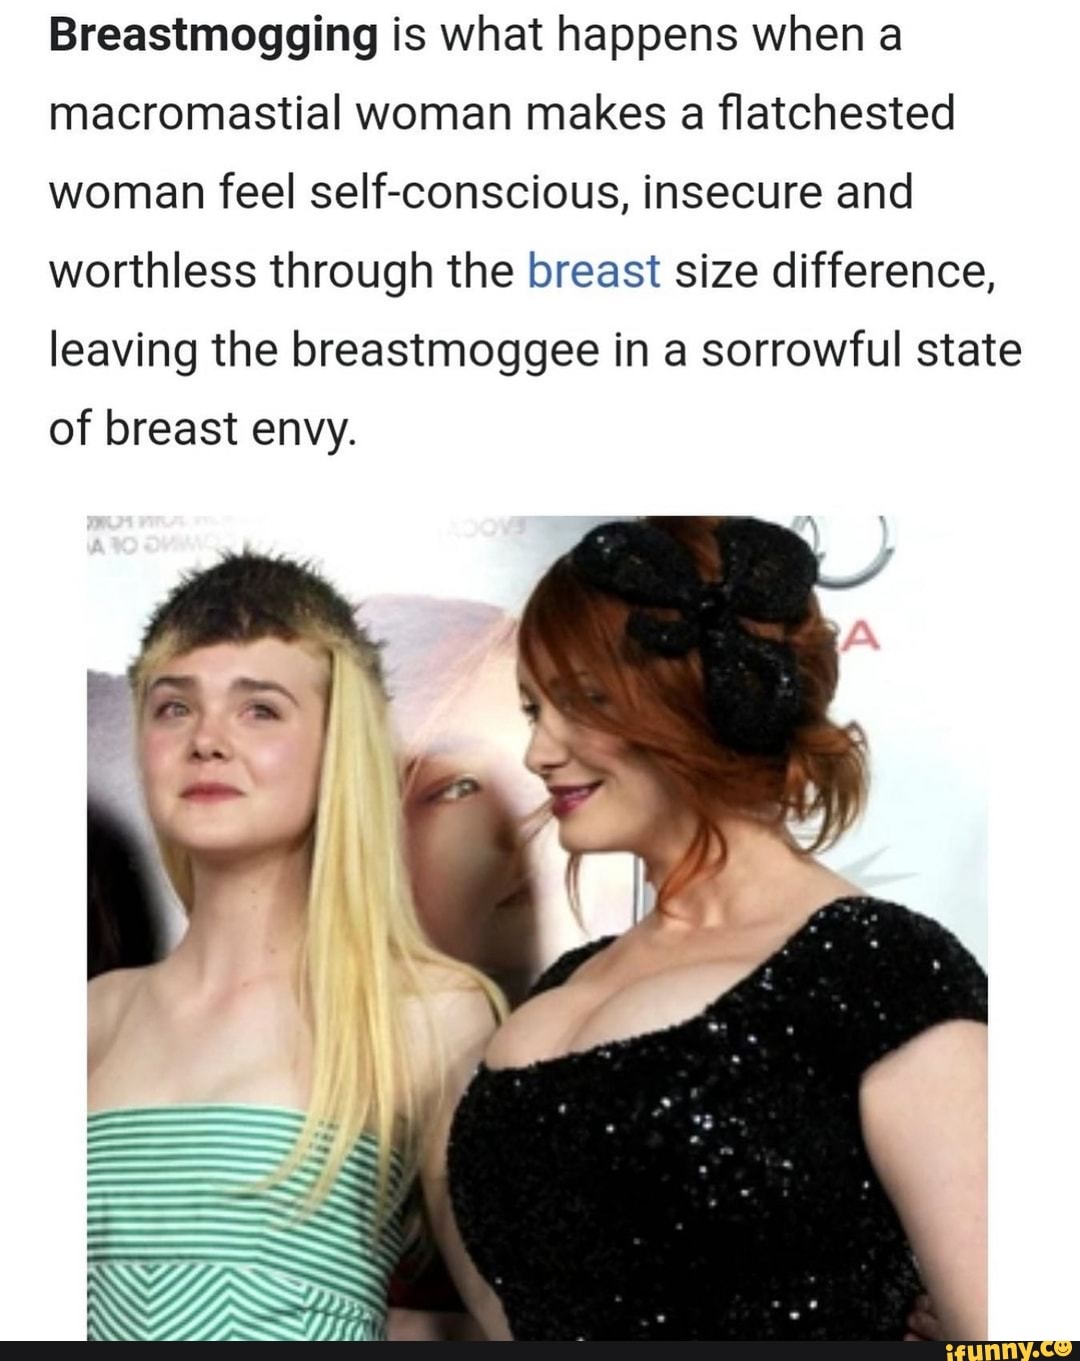 Breastmogging is what happens when macromastial woman makes a flatchested)  women feel self-conscious, insecure and worthless through the breast size  difference, leaving the breastmoggee in sorrowful state of breast envy. -  iFunny